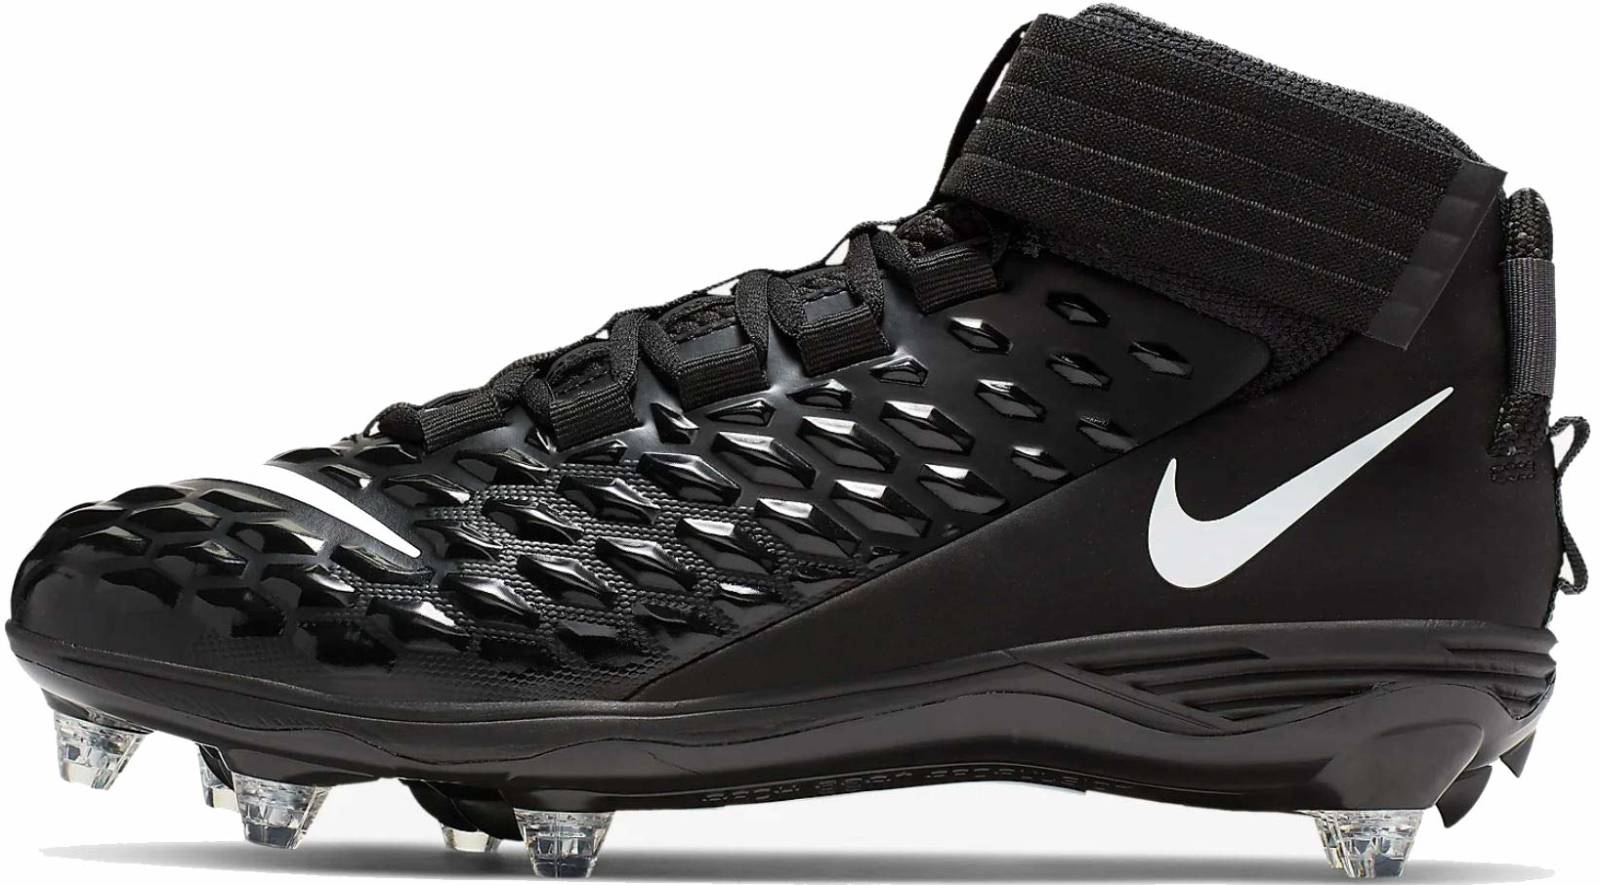 Save 59% on Football Cleats (41 Models 